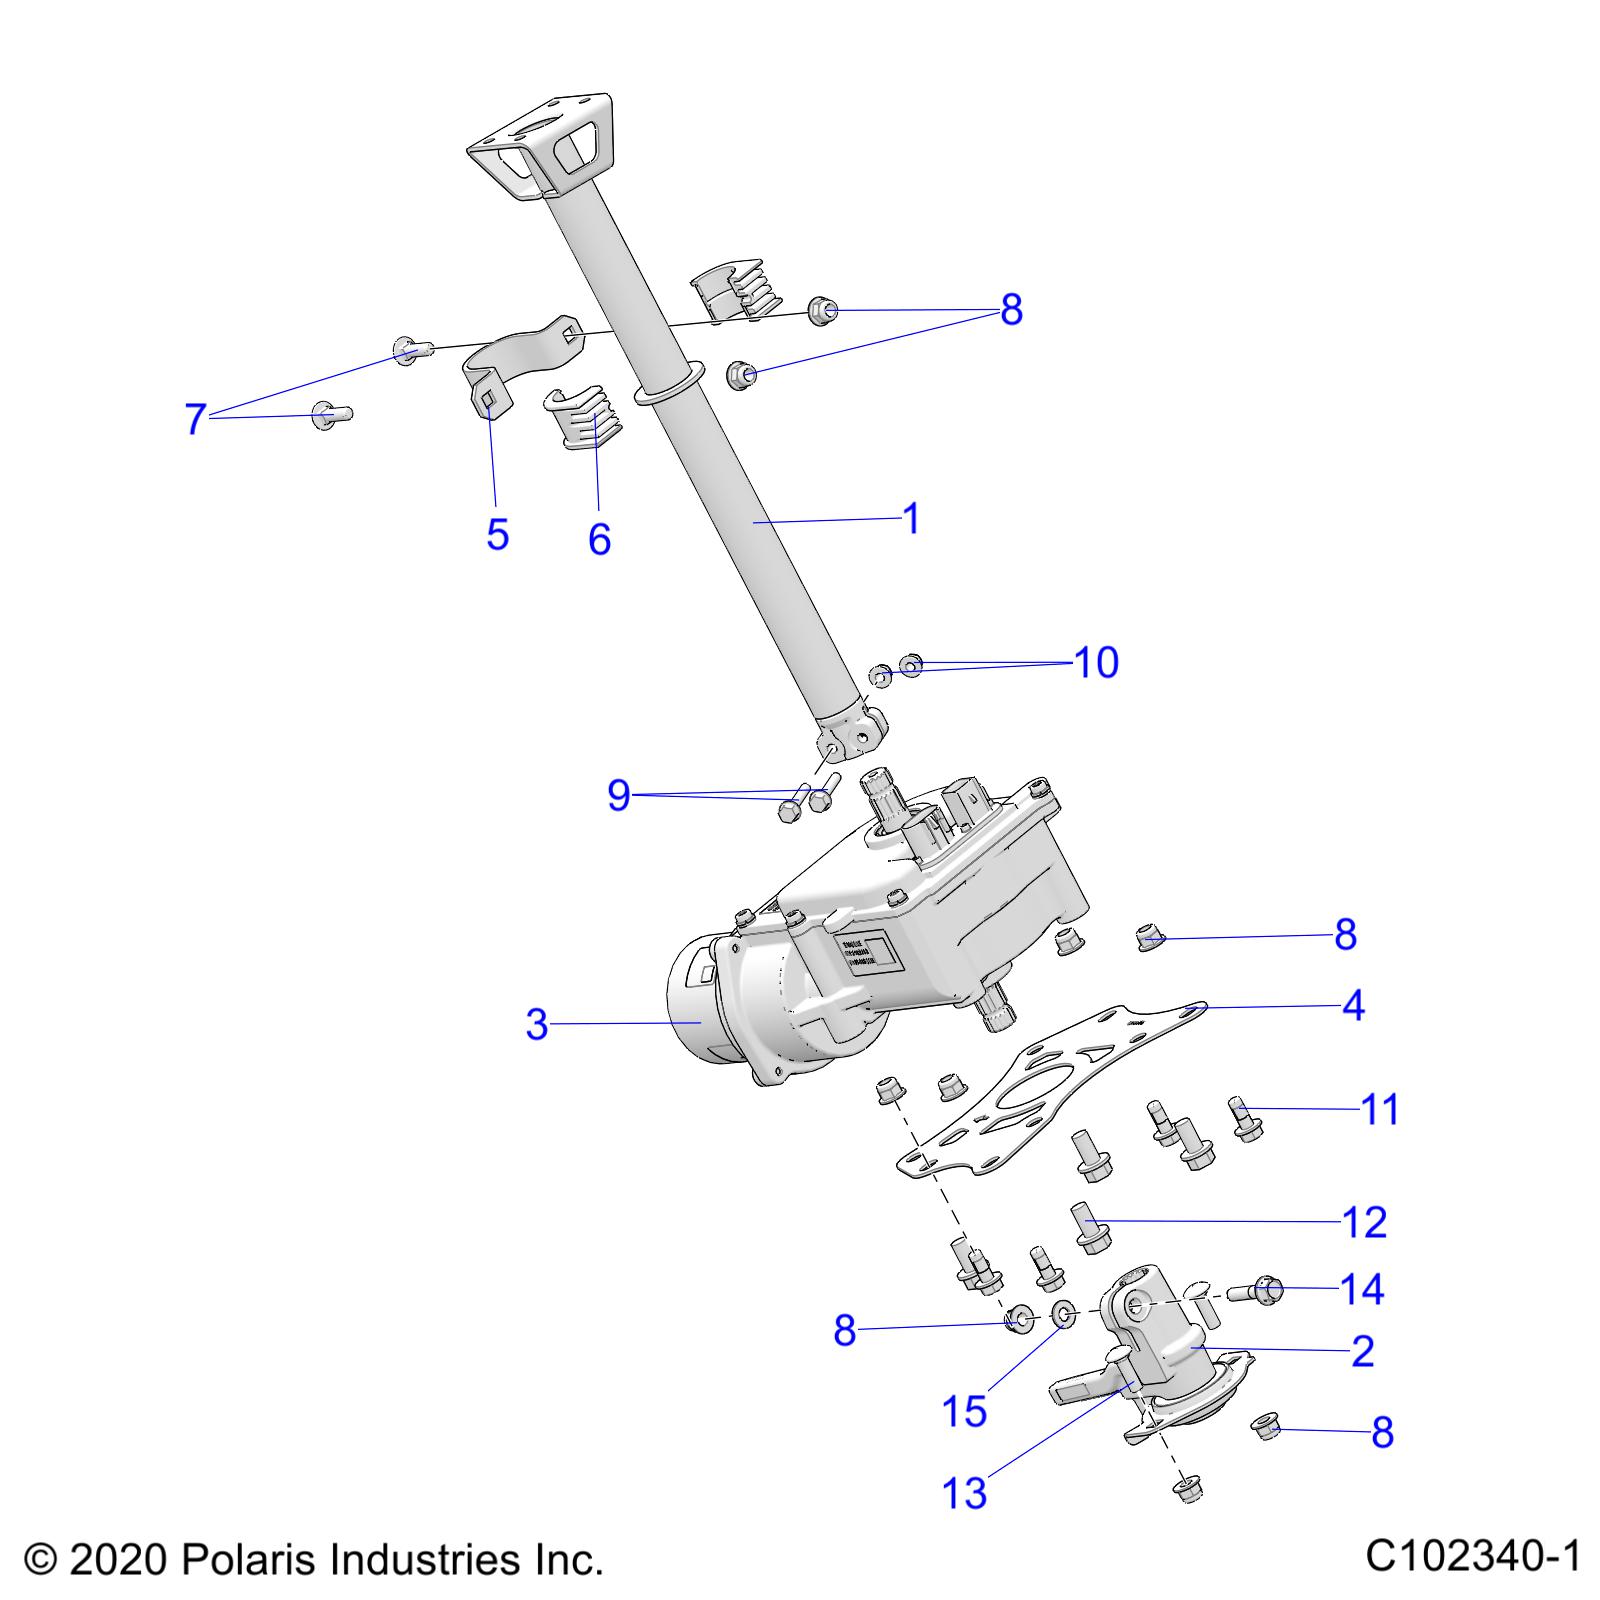 Part Number : 2415061 POWER STEERING ASSEMBLY  ATV